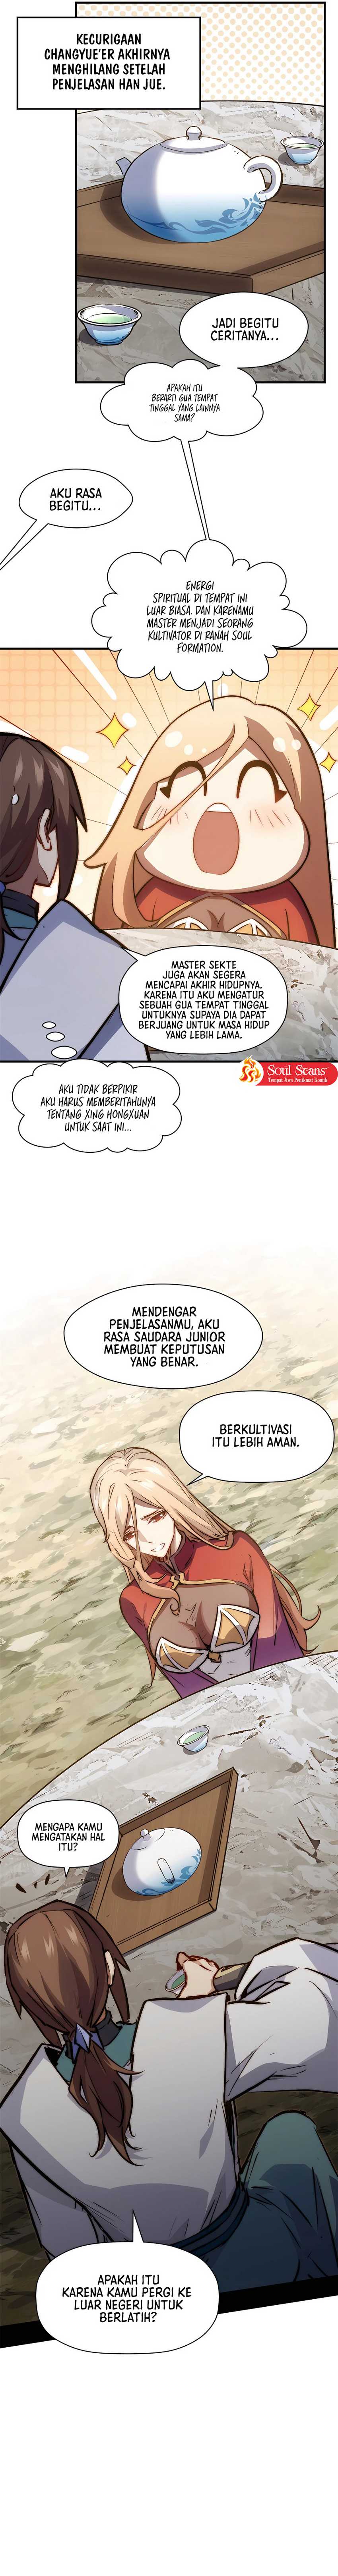 Dilarang COPAS - situs resmi www.mangacanblog.com - Komik top tier providence secretly cultivate for a thousand years 118 - chapter 118 119 Indonesia top tier providence secretly cultivate for a thousand years 118 - chapter 118 Terbaru 7|Baca Manga Komik Indonesia|Mangacan